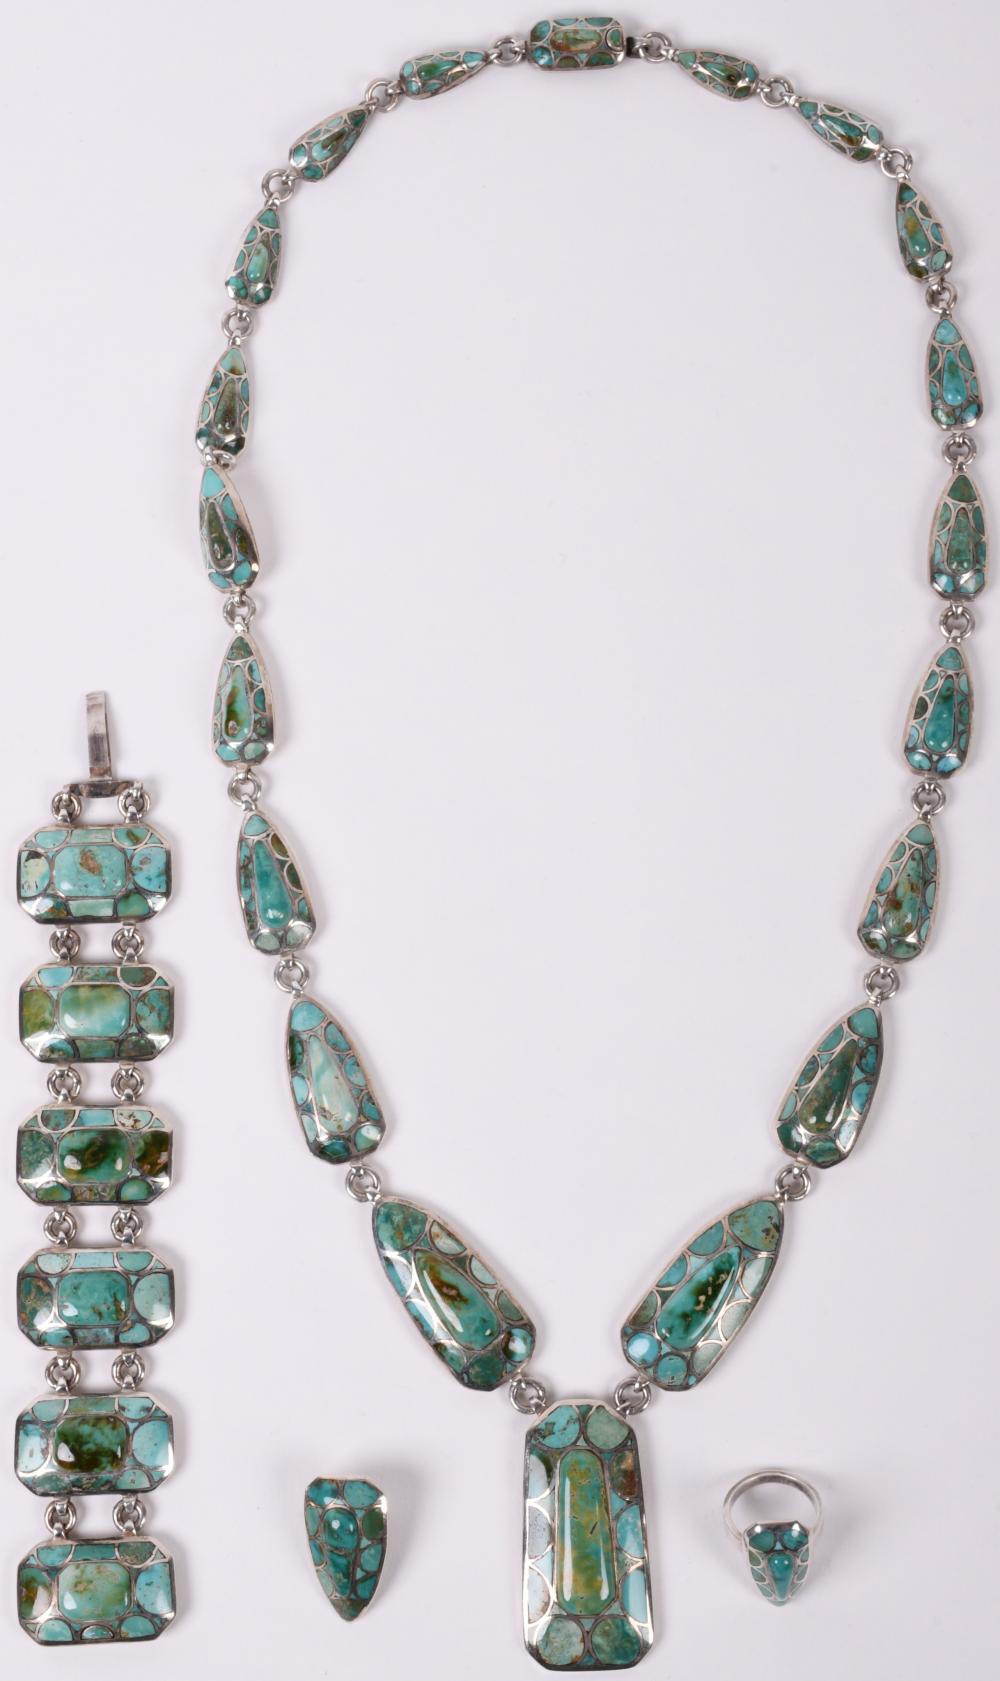 SUITE OF TURQUOISE AND SILVER ADORNMENTSSUITE 2ec5a4